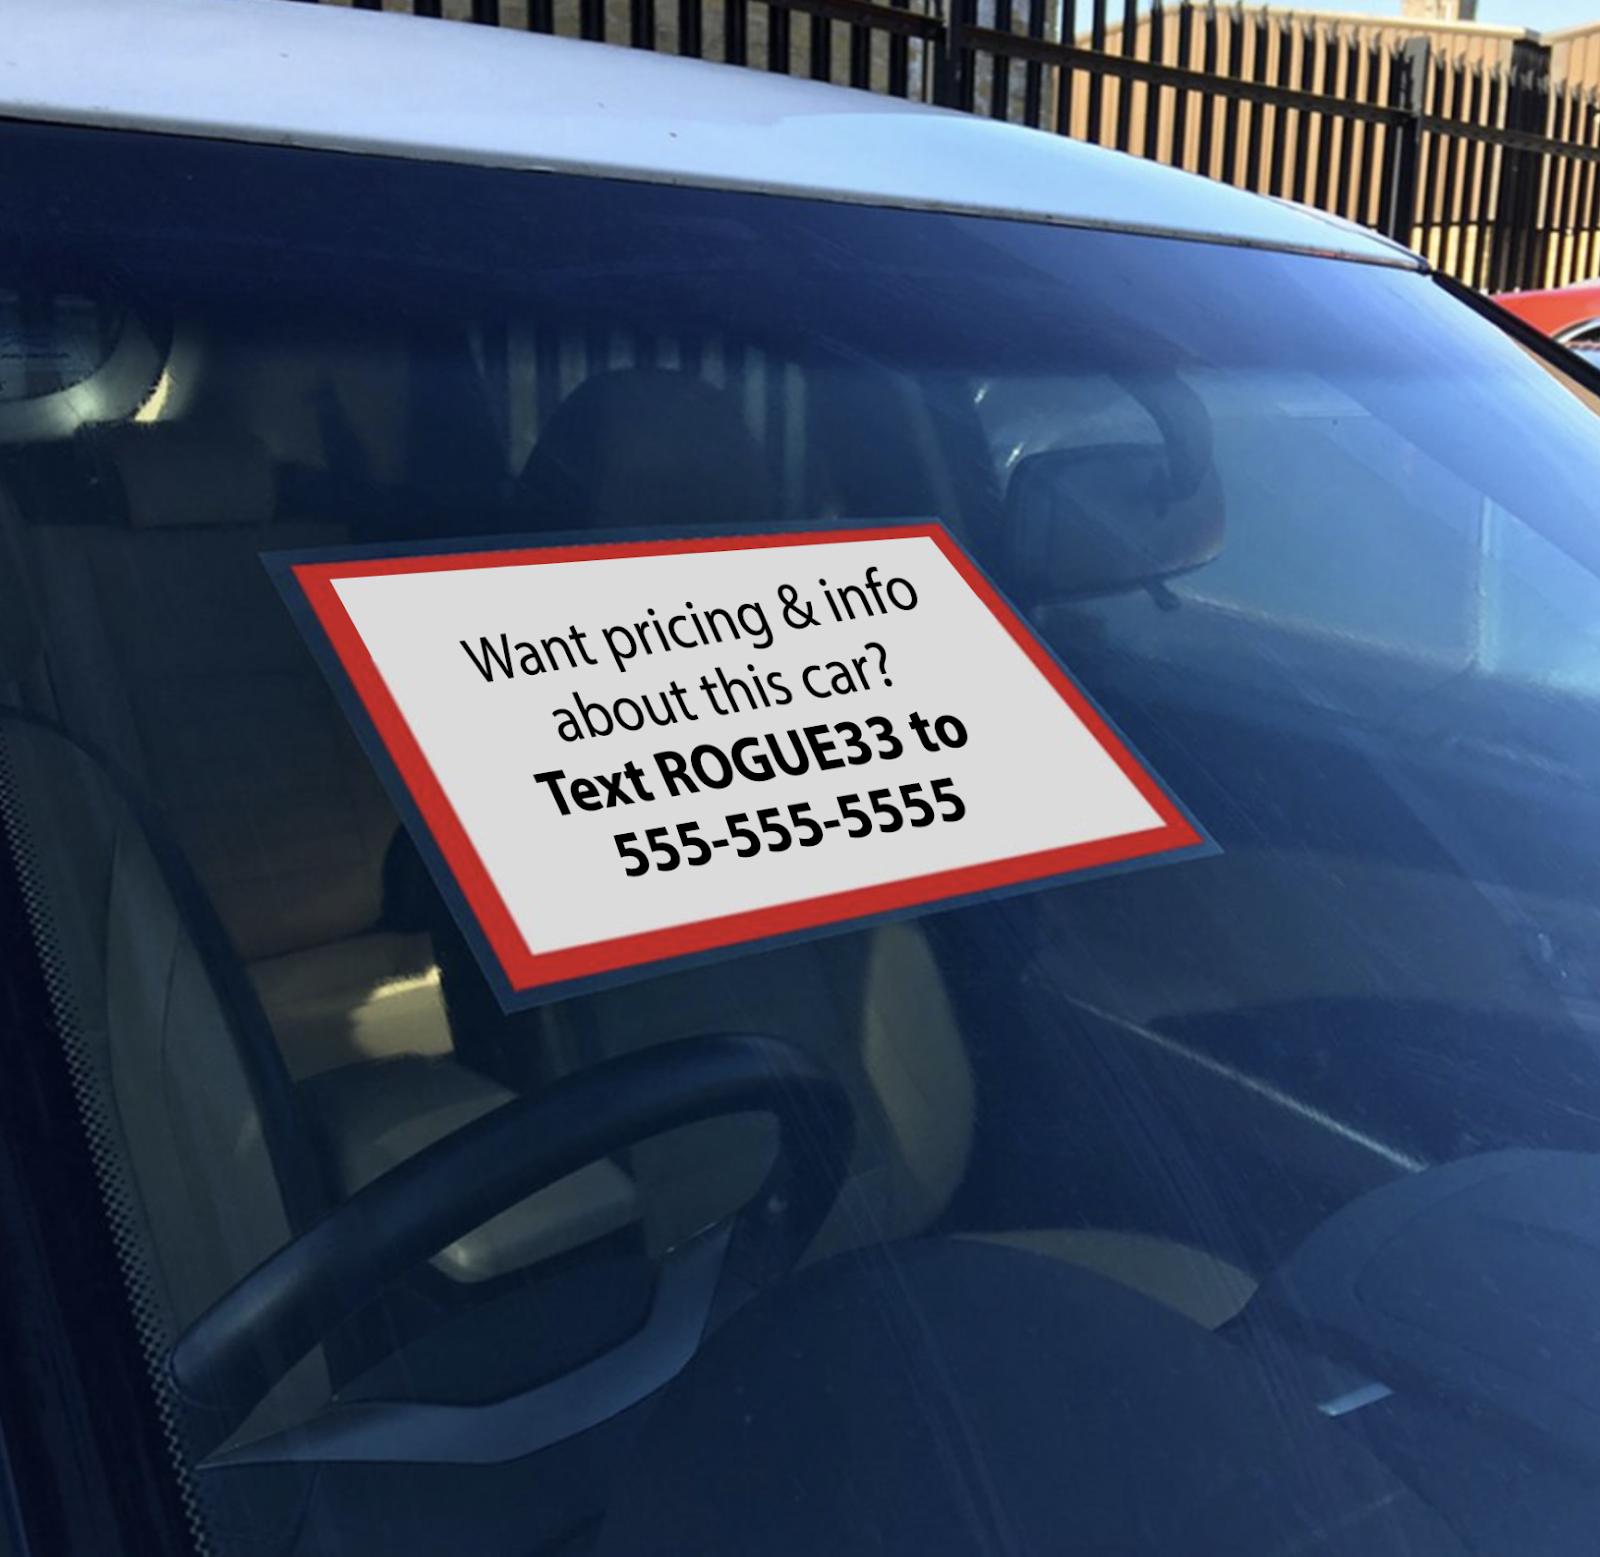 sign on car window that says "Want pricing & info about this car? Text ROGUE33 to 555-555-5555"